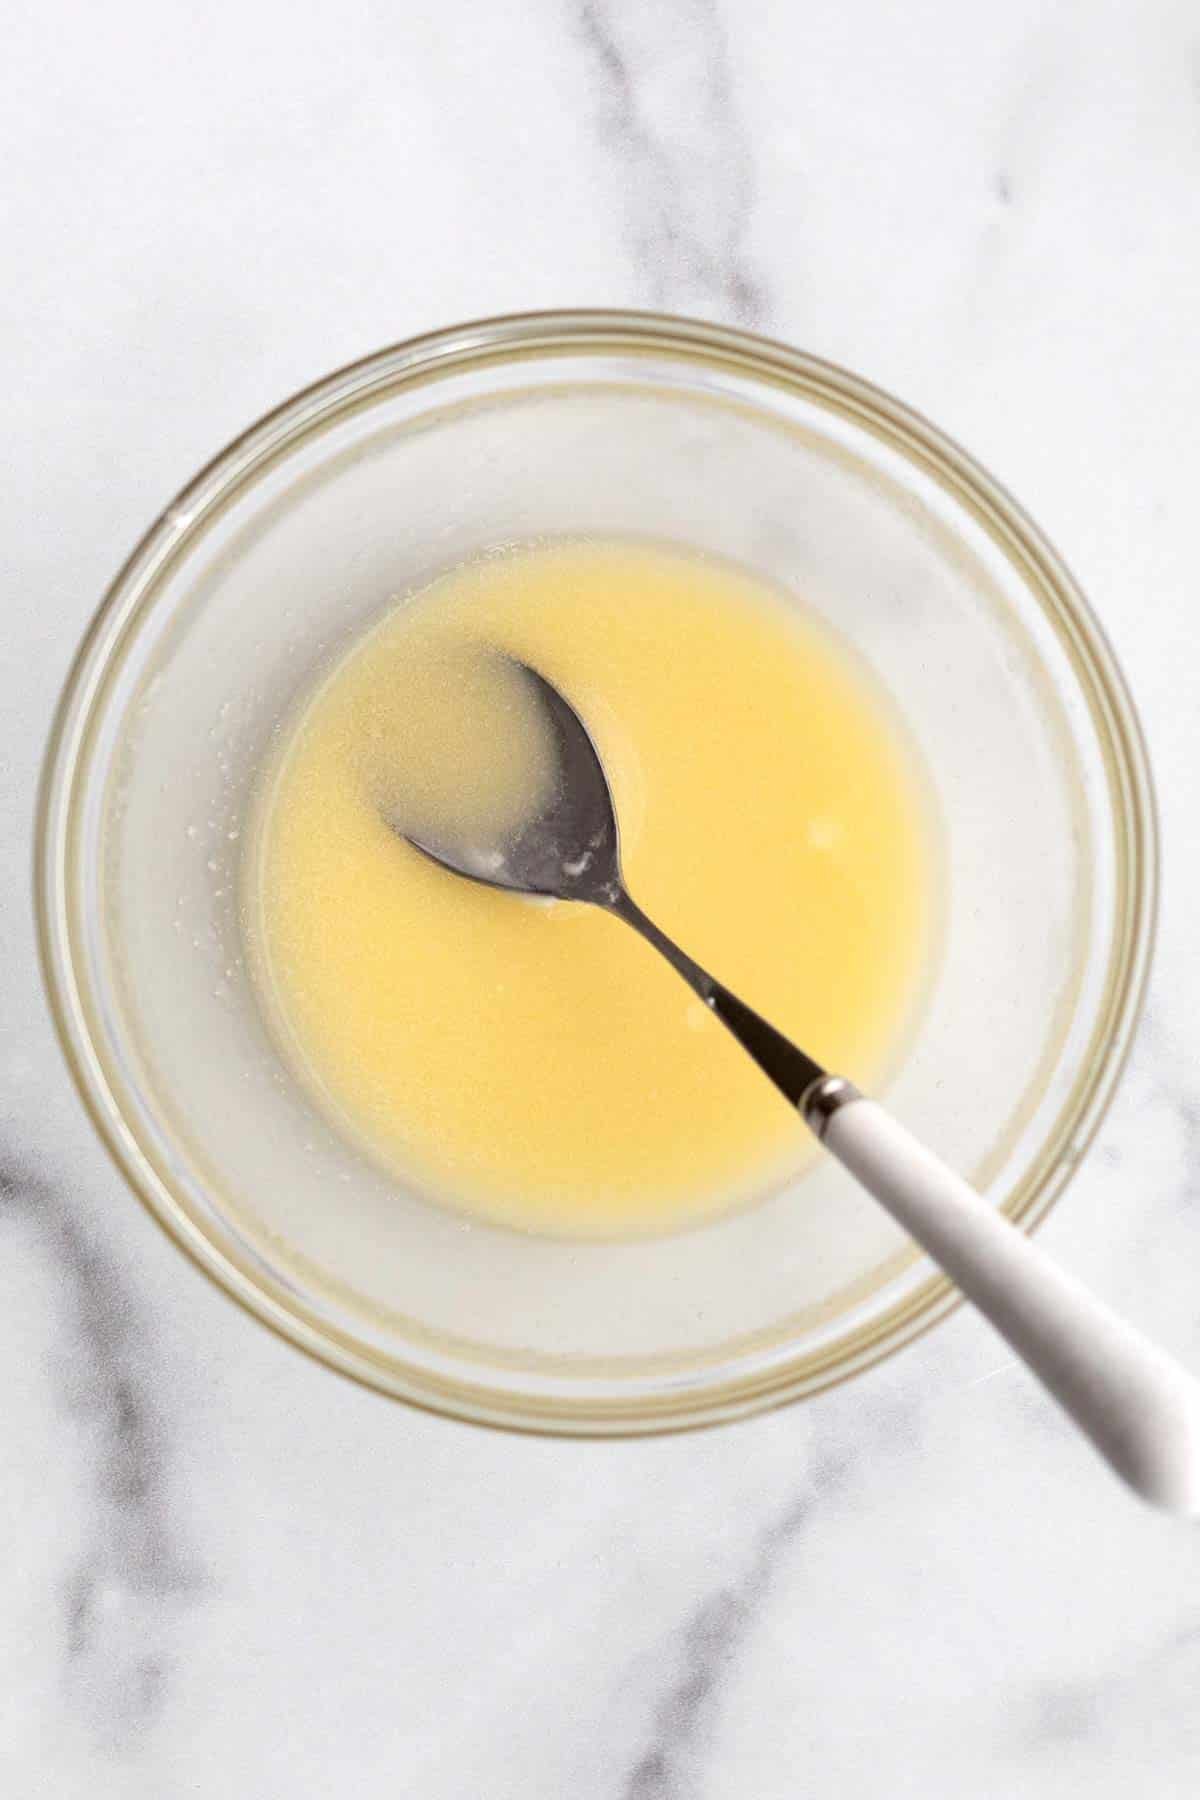 Yellow melted butter in a bowl with a spoon.